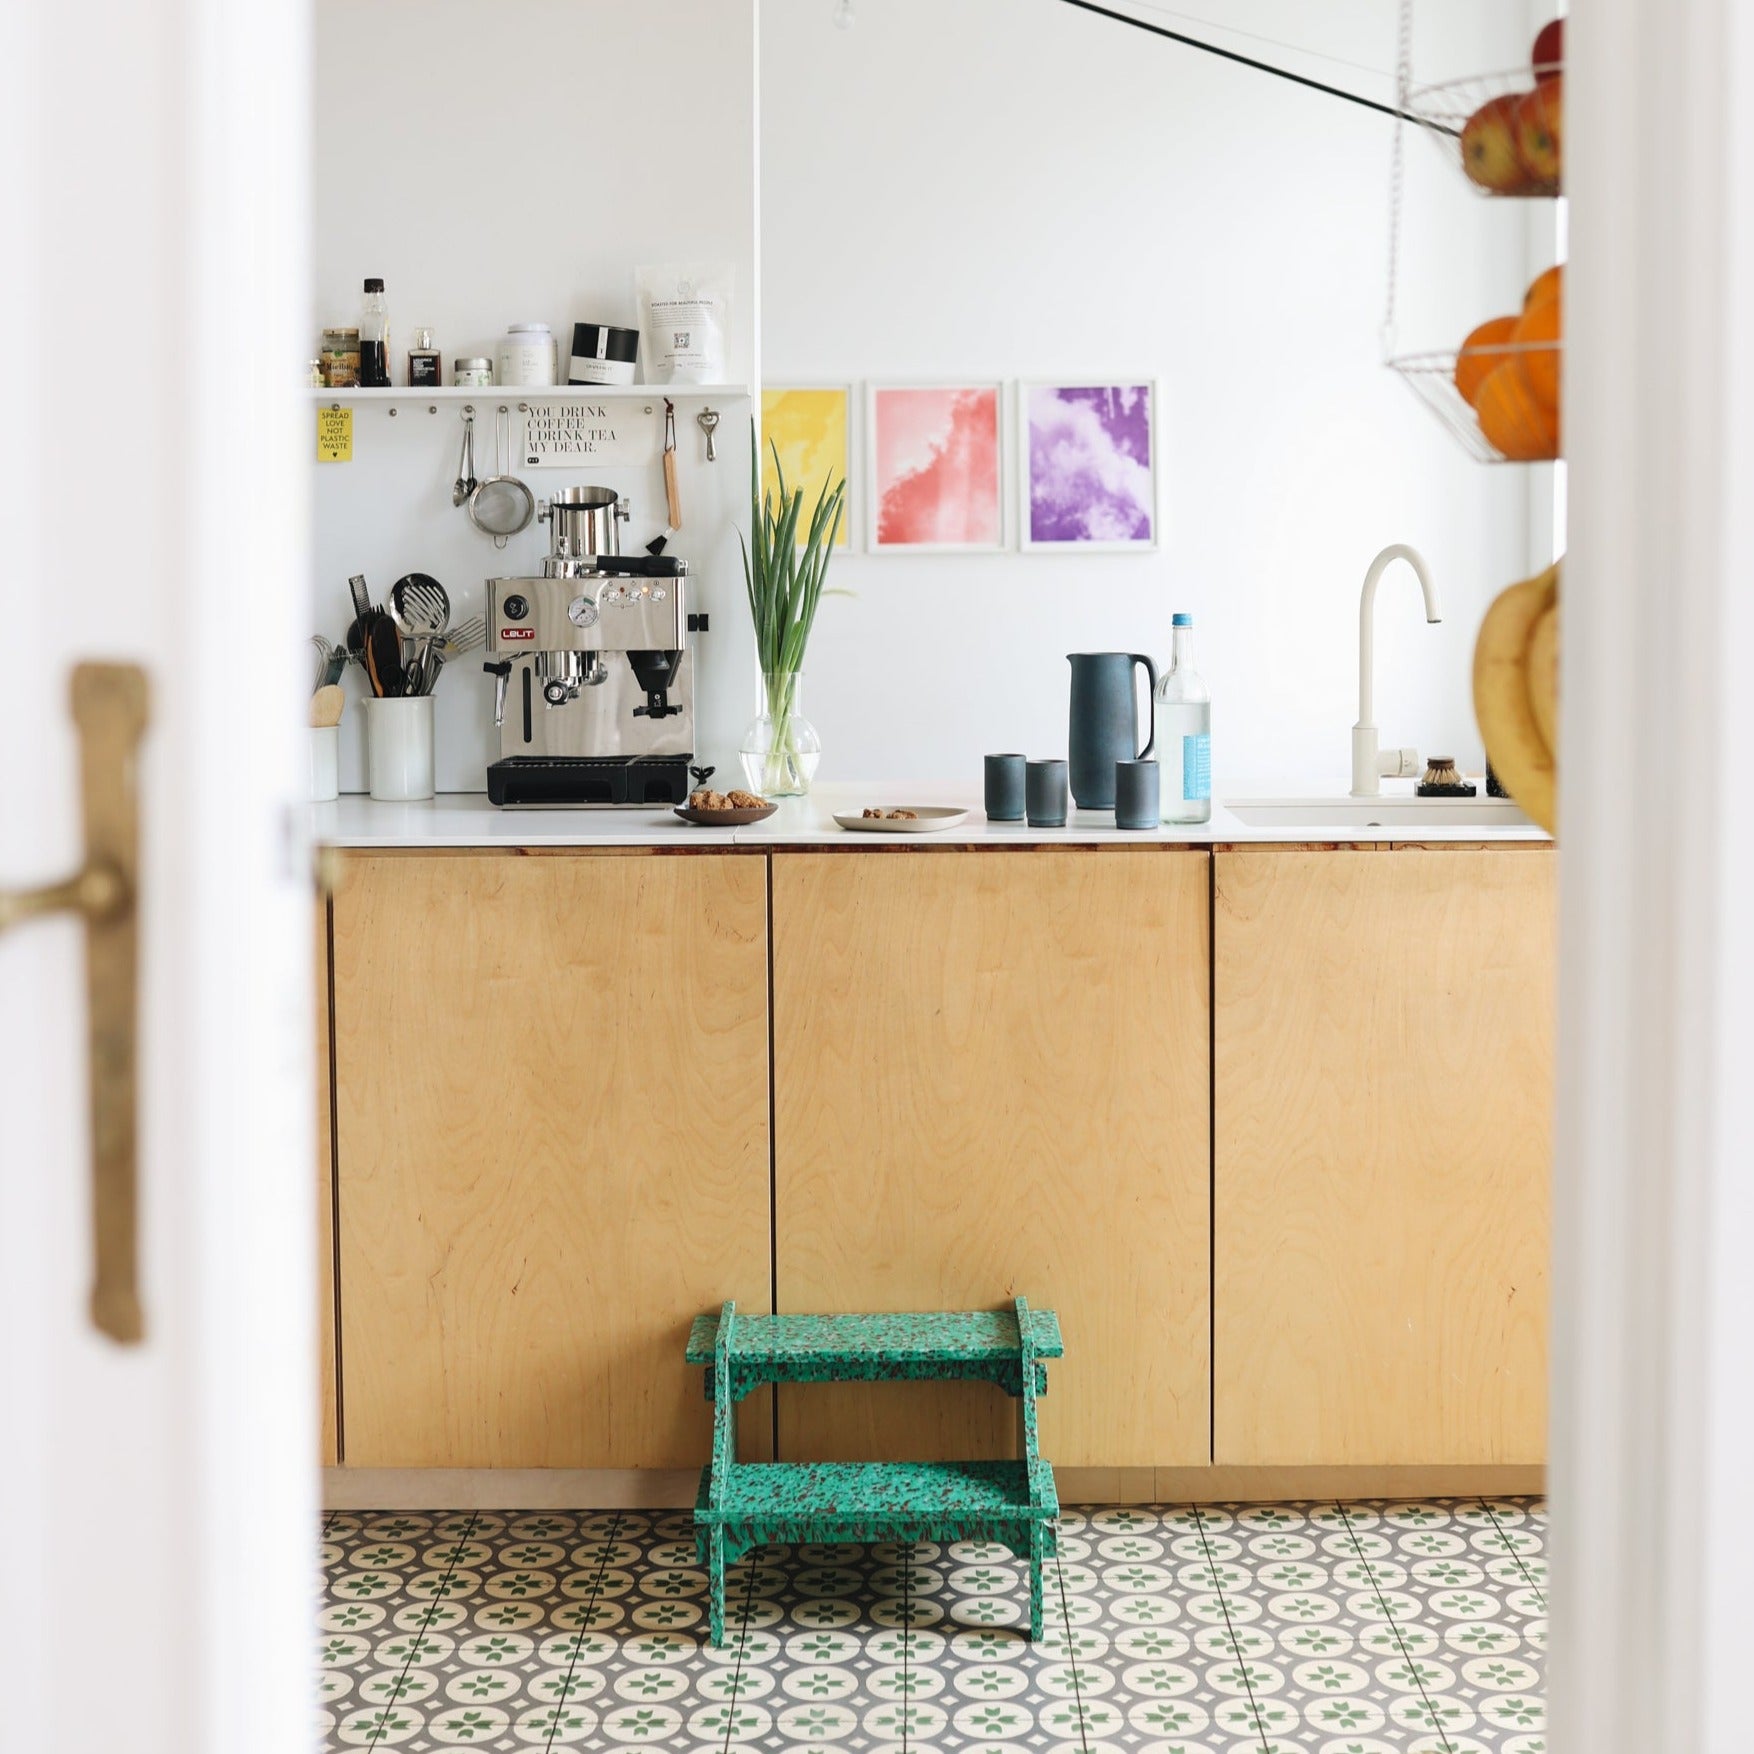 GREEN STEP STOOL IN KITCHEN BY THE MINIMONO PROJECT - BRAND FOR ECO FRIENDLY - PLAYFUL - MULTI FUNCTIONAL - SUSTAINABLE - HIGH QUALITY - DESIGN FURNITURE FROM RECYCLED PLASTIC FOR BOTH ADULT AND CHILDREN MADE IN BERLIN GERMANY